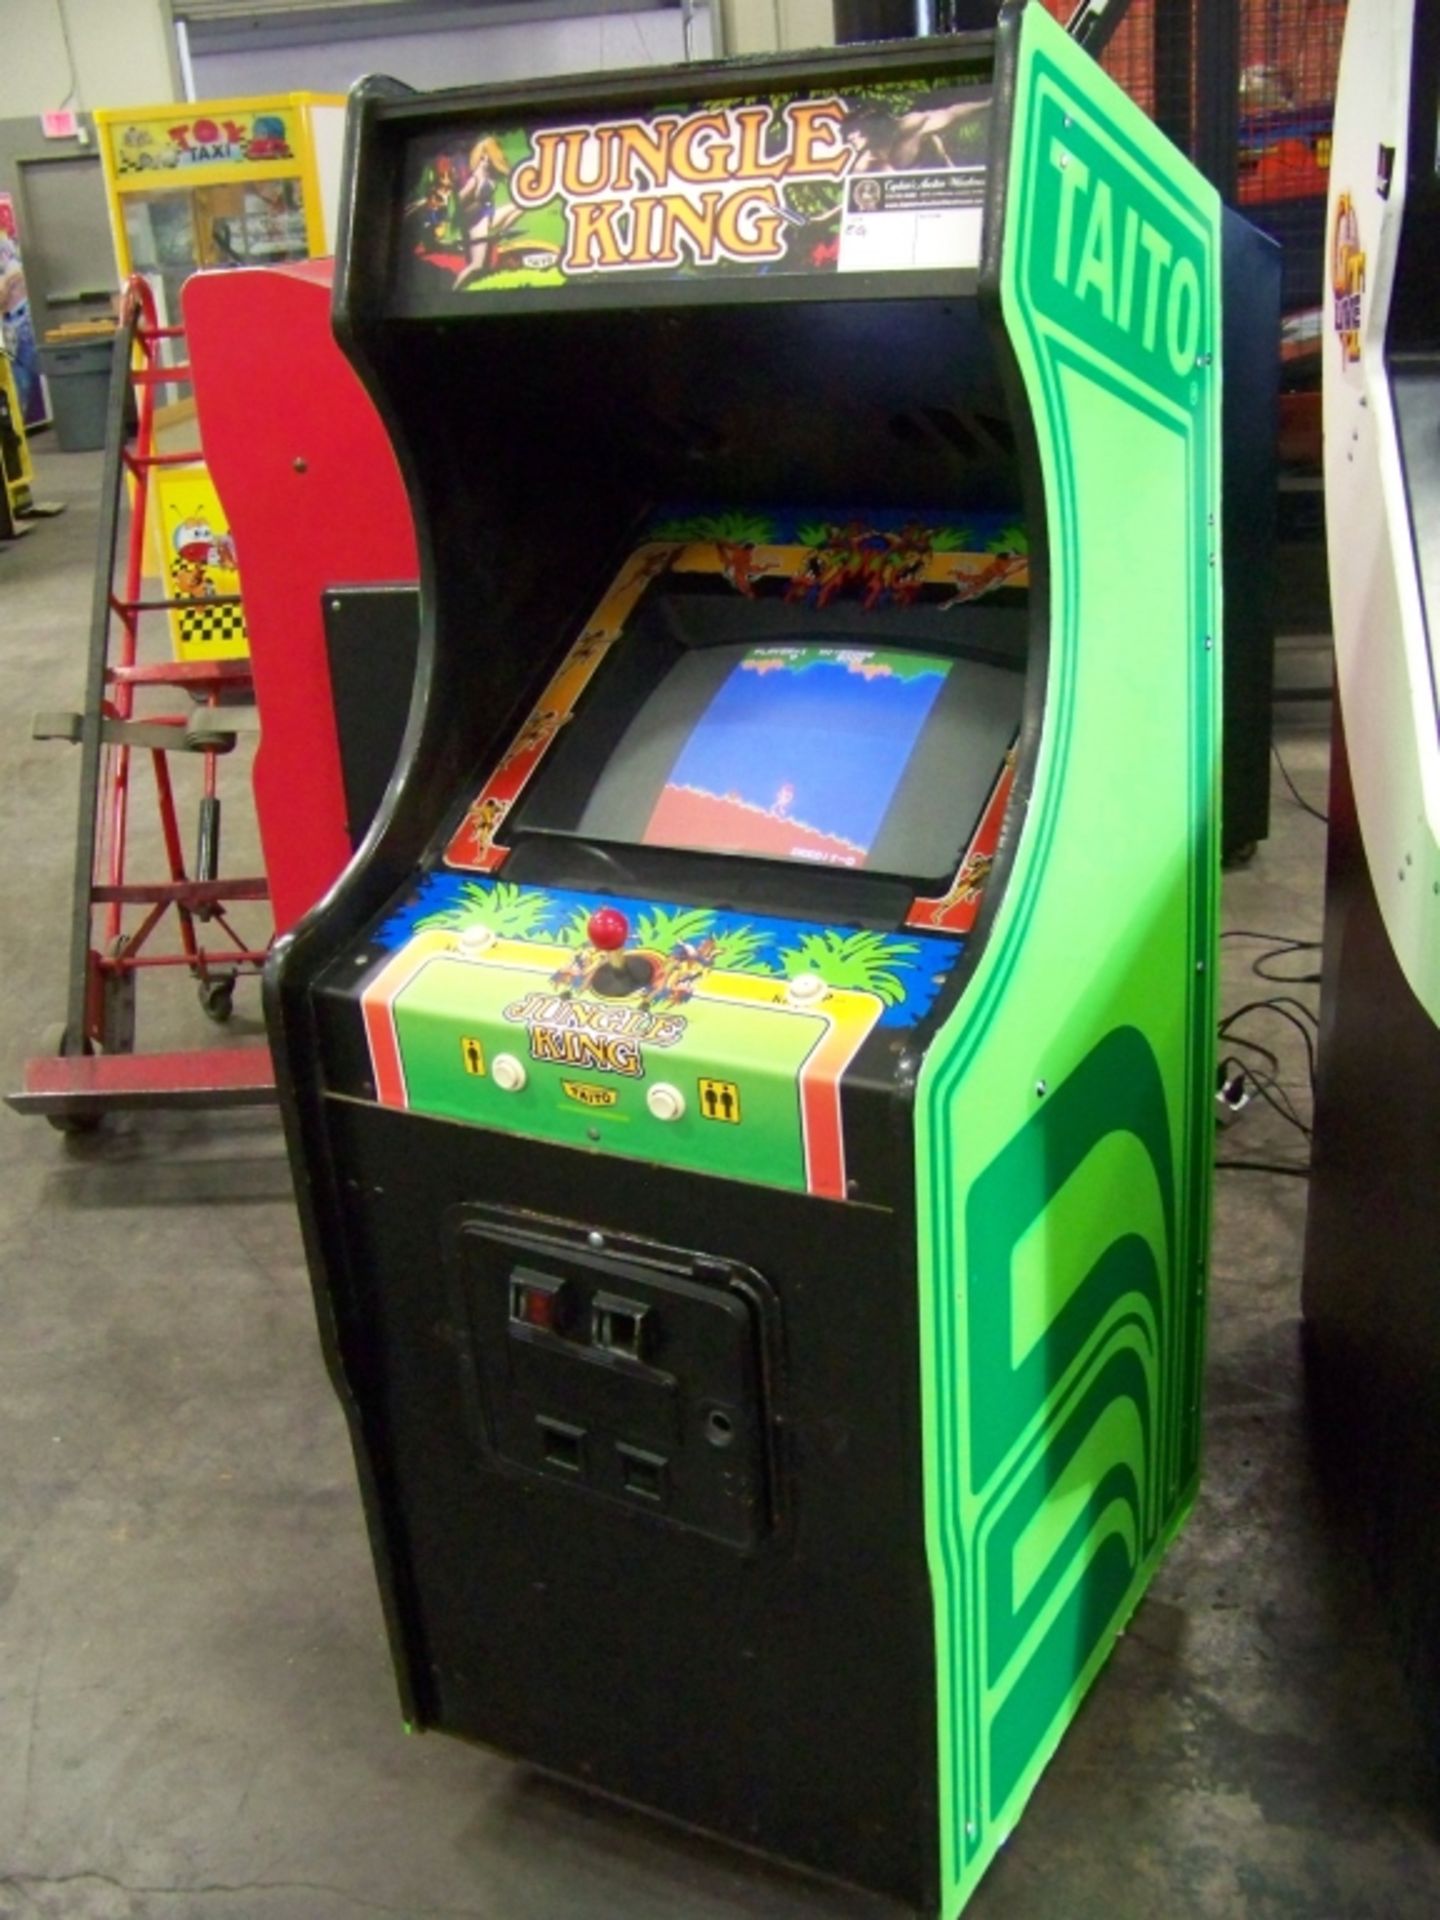 JUNGLE KING TAITO CABINET GAME ELF PCB - Image 4 of 4